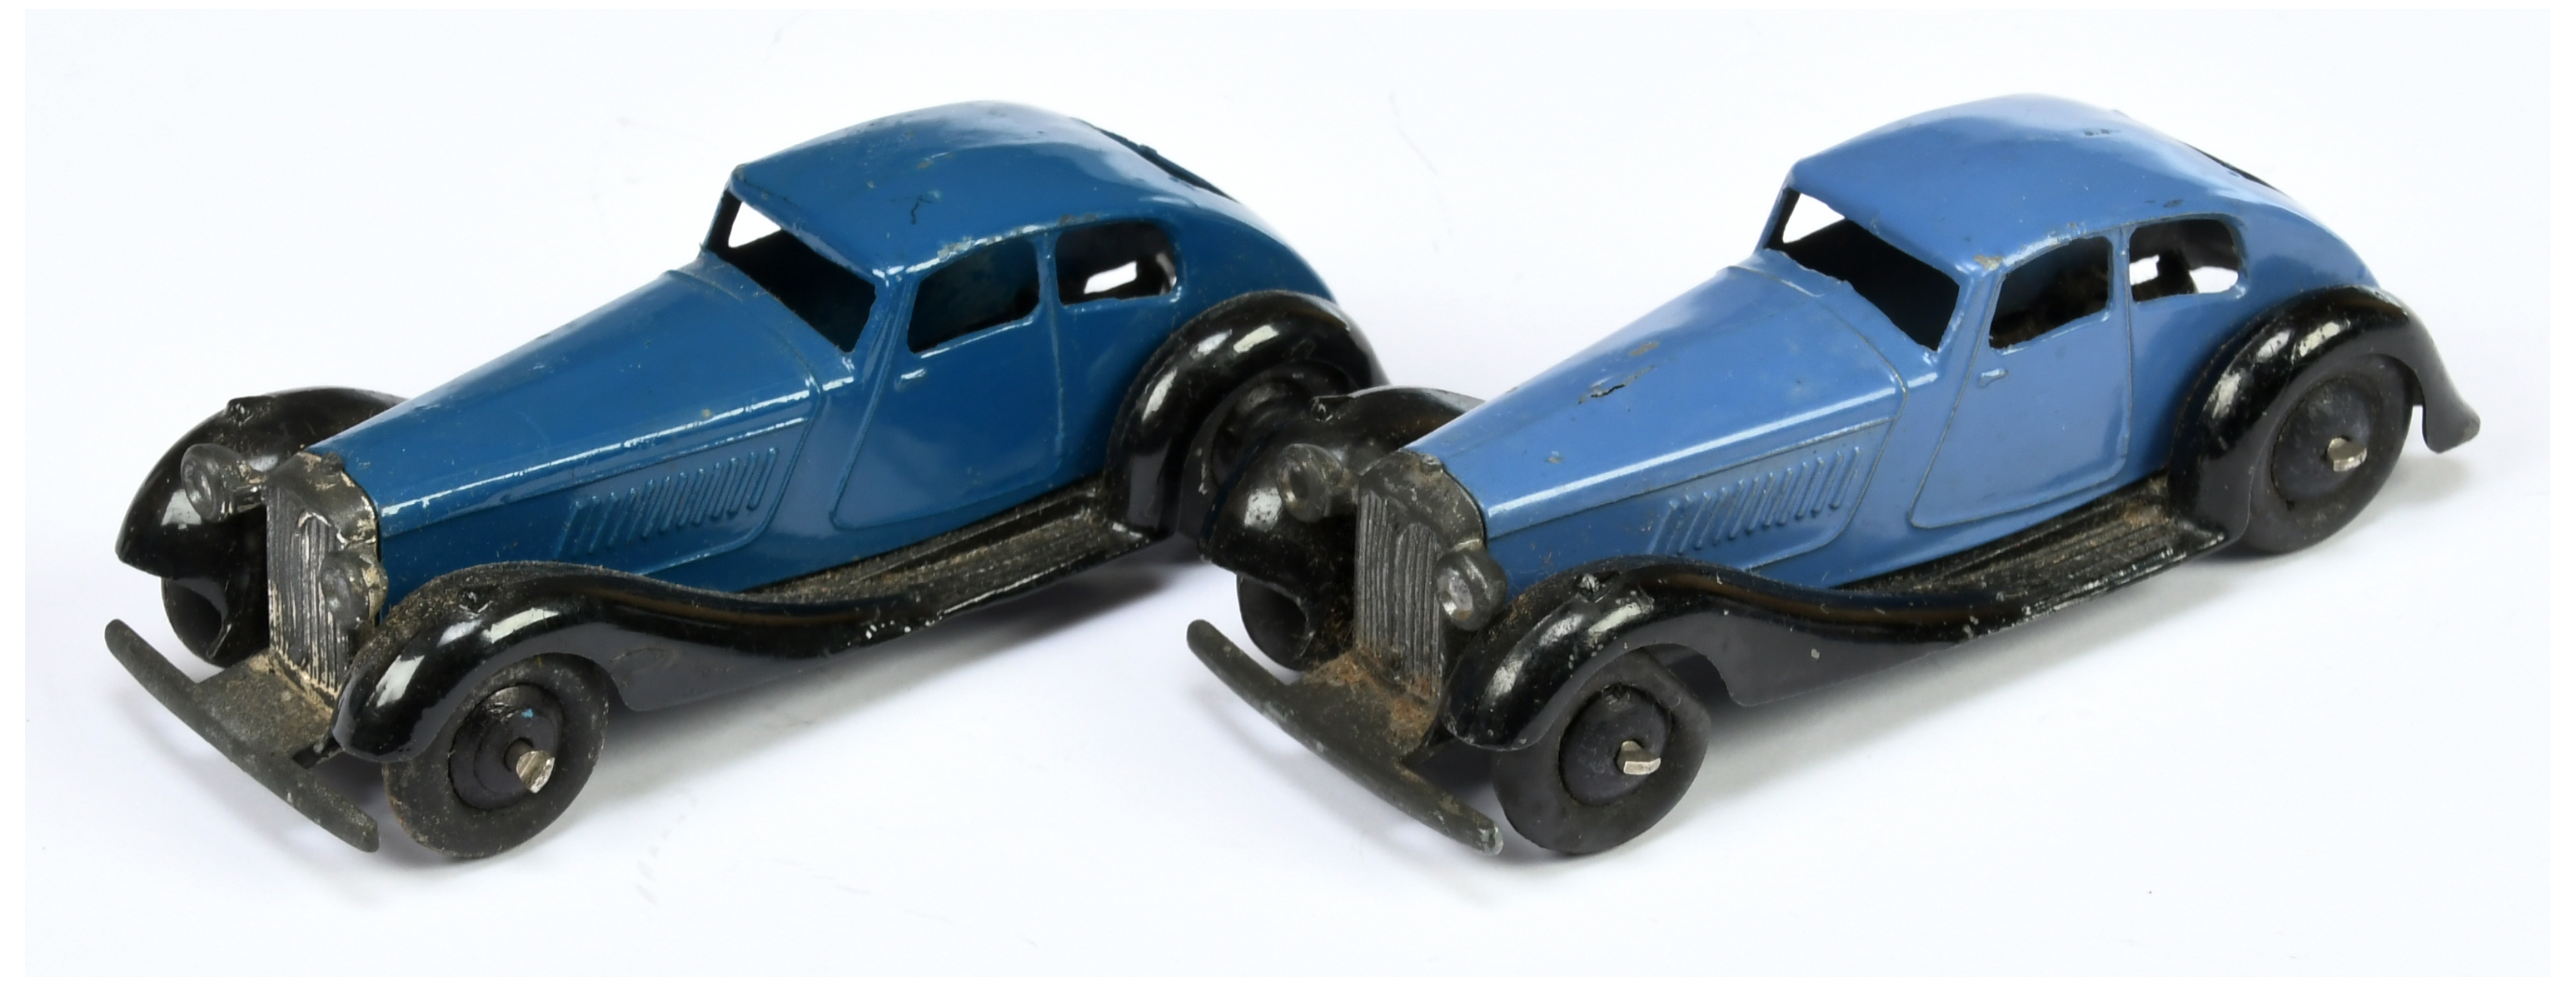 Dinky pair of 36d Rover - both are closed chassis